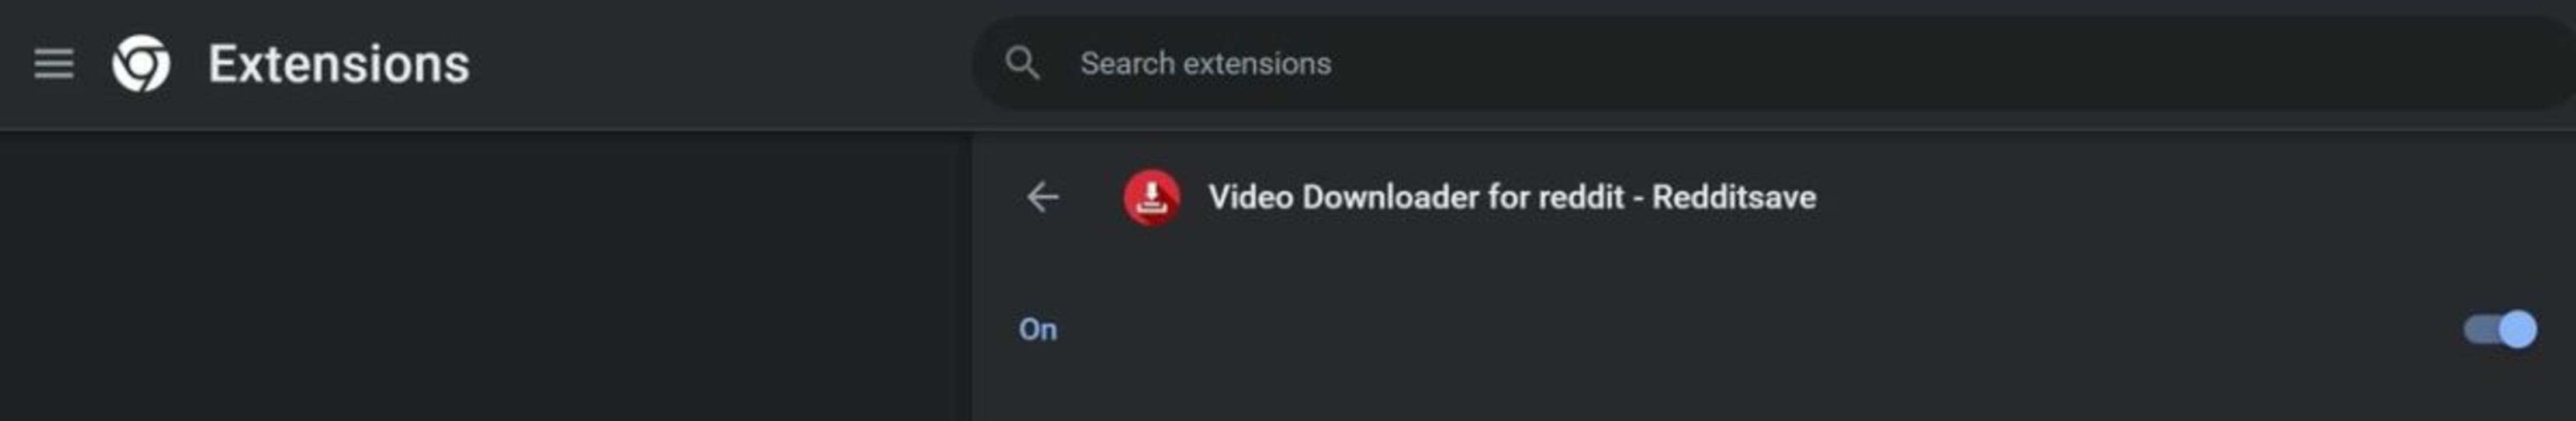 How to use the Video Downloader for Reddit Chrome extension in 4 steps -  Softonic